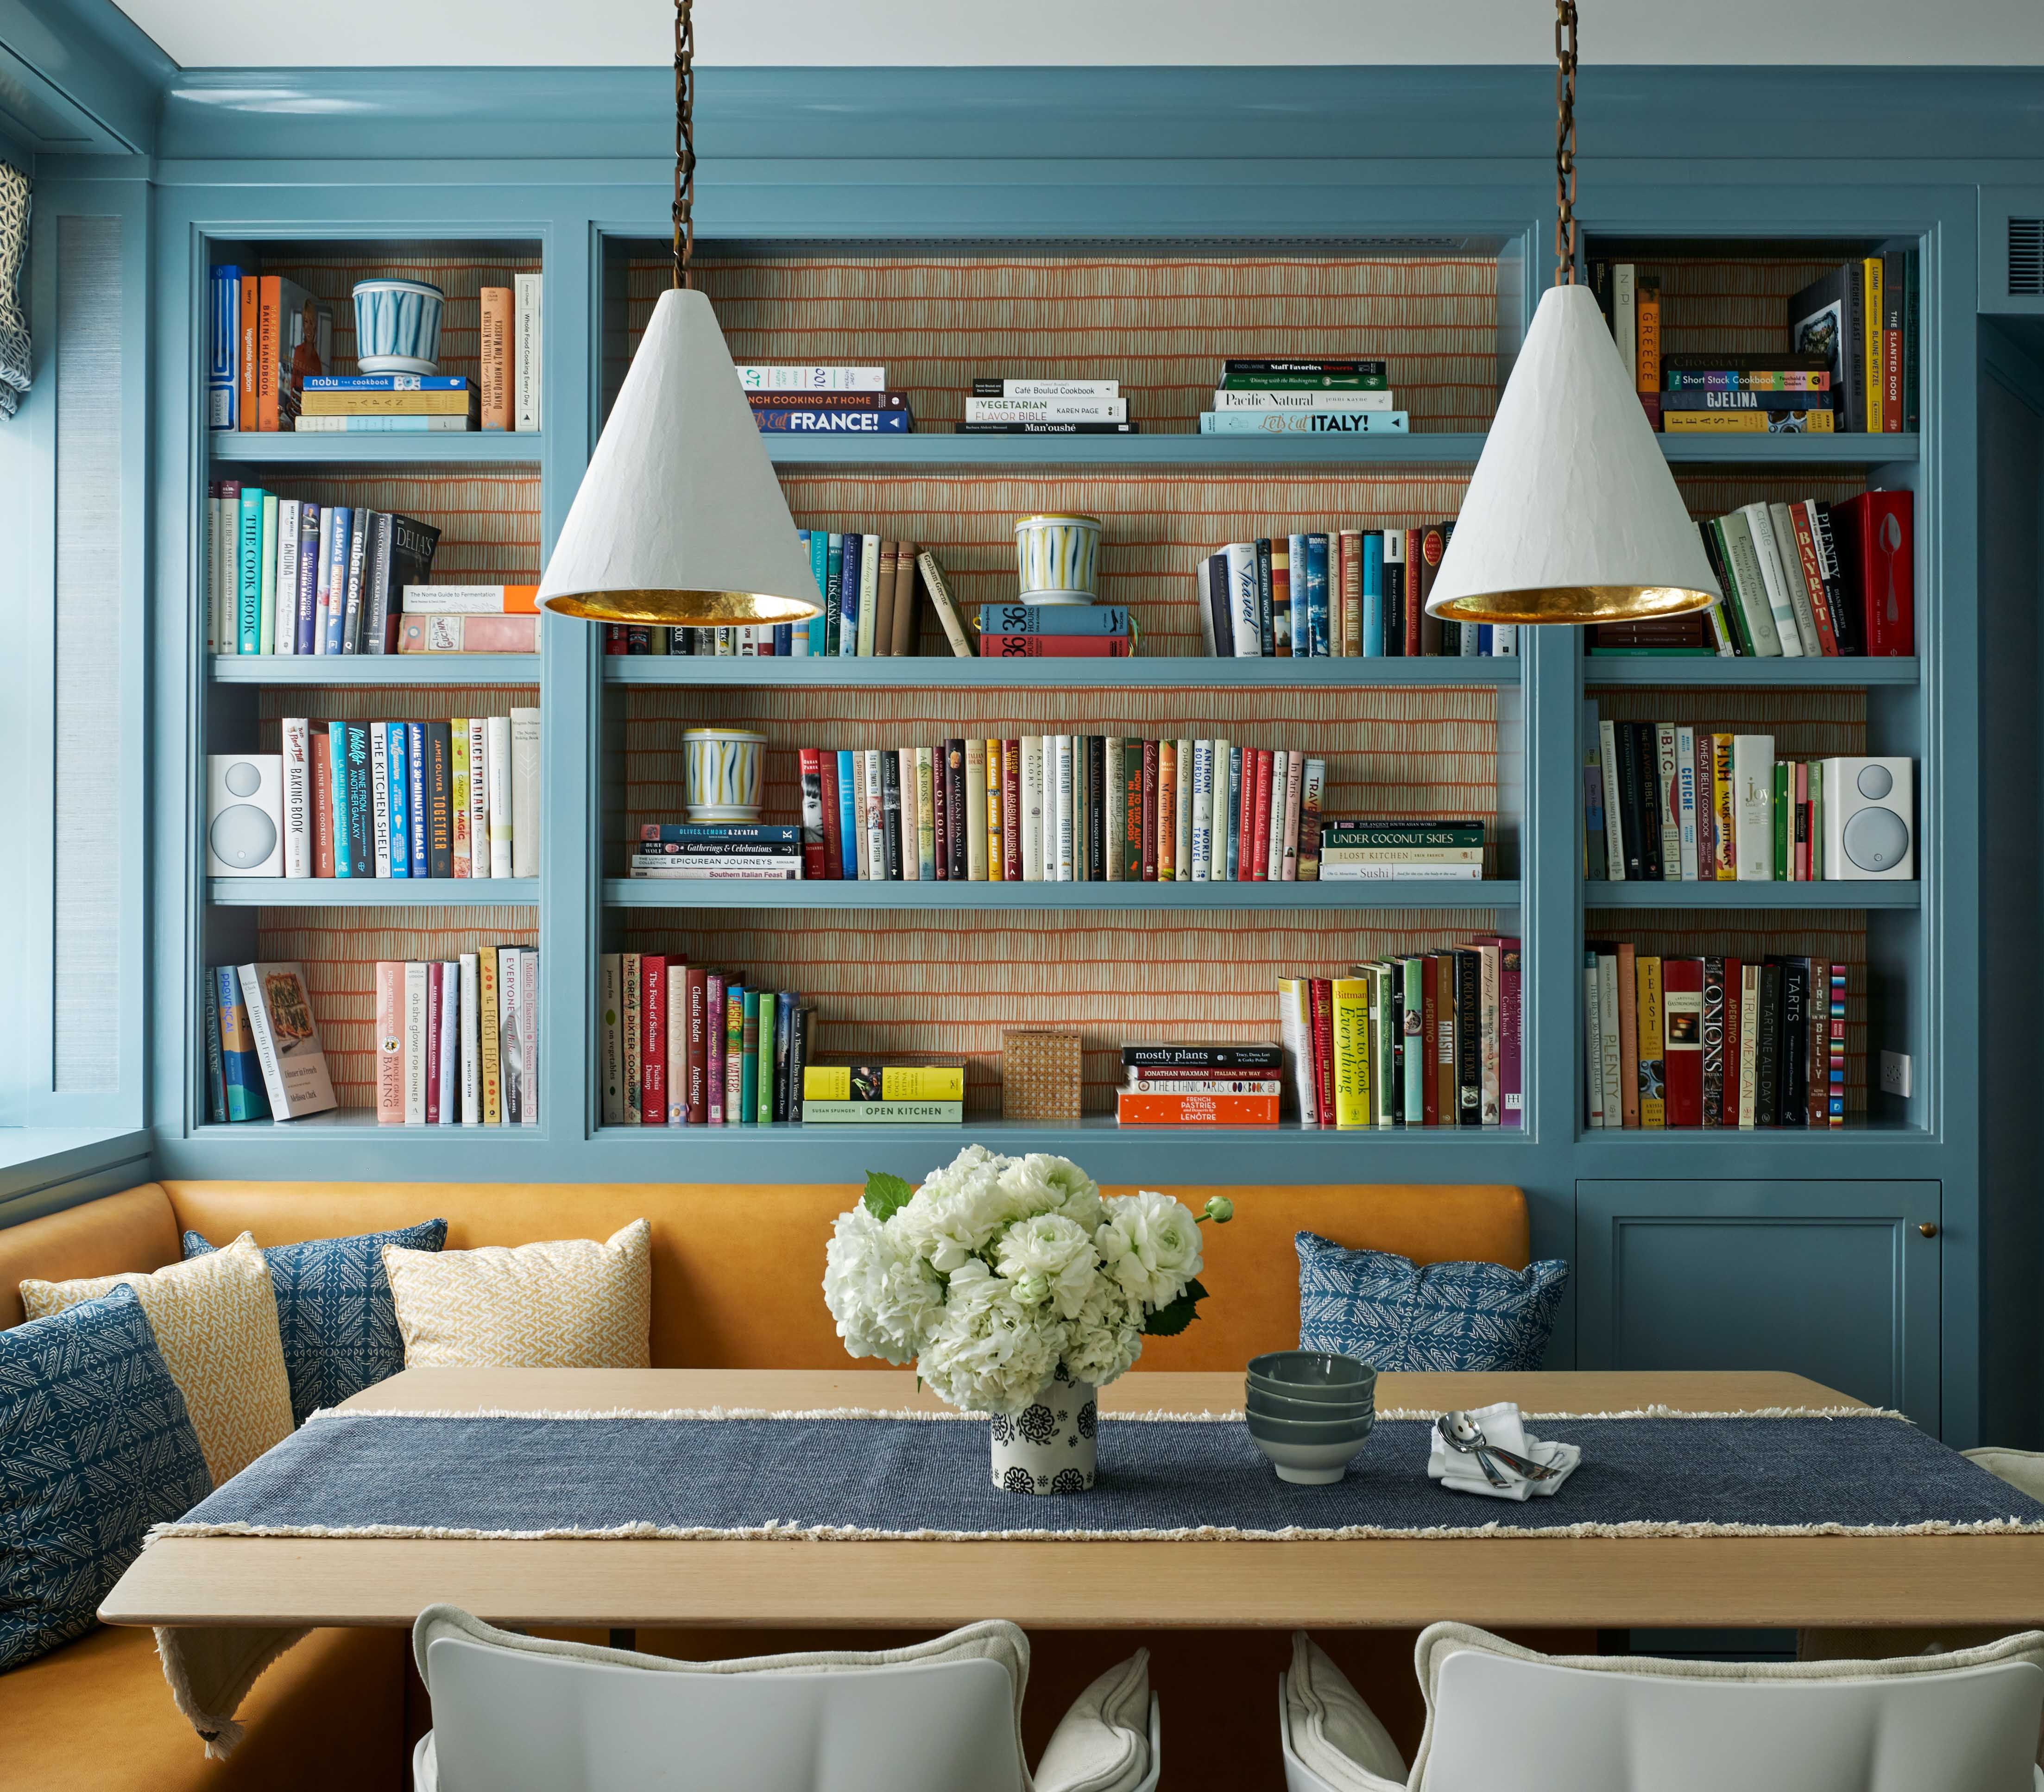 custom banquette seating with small table